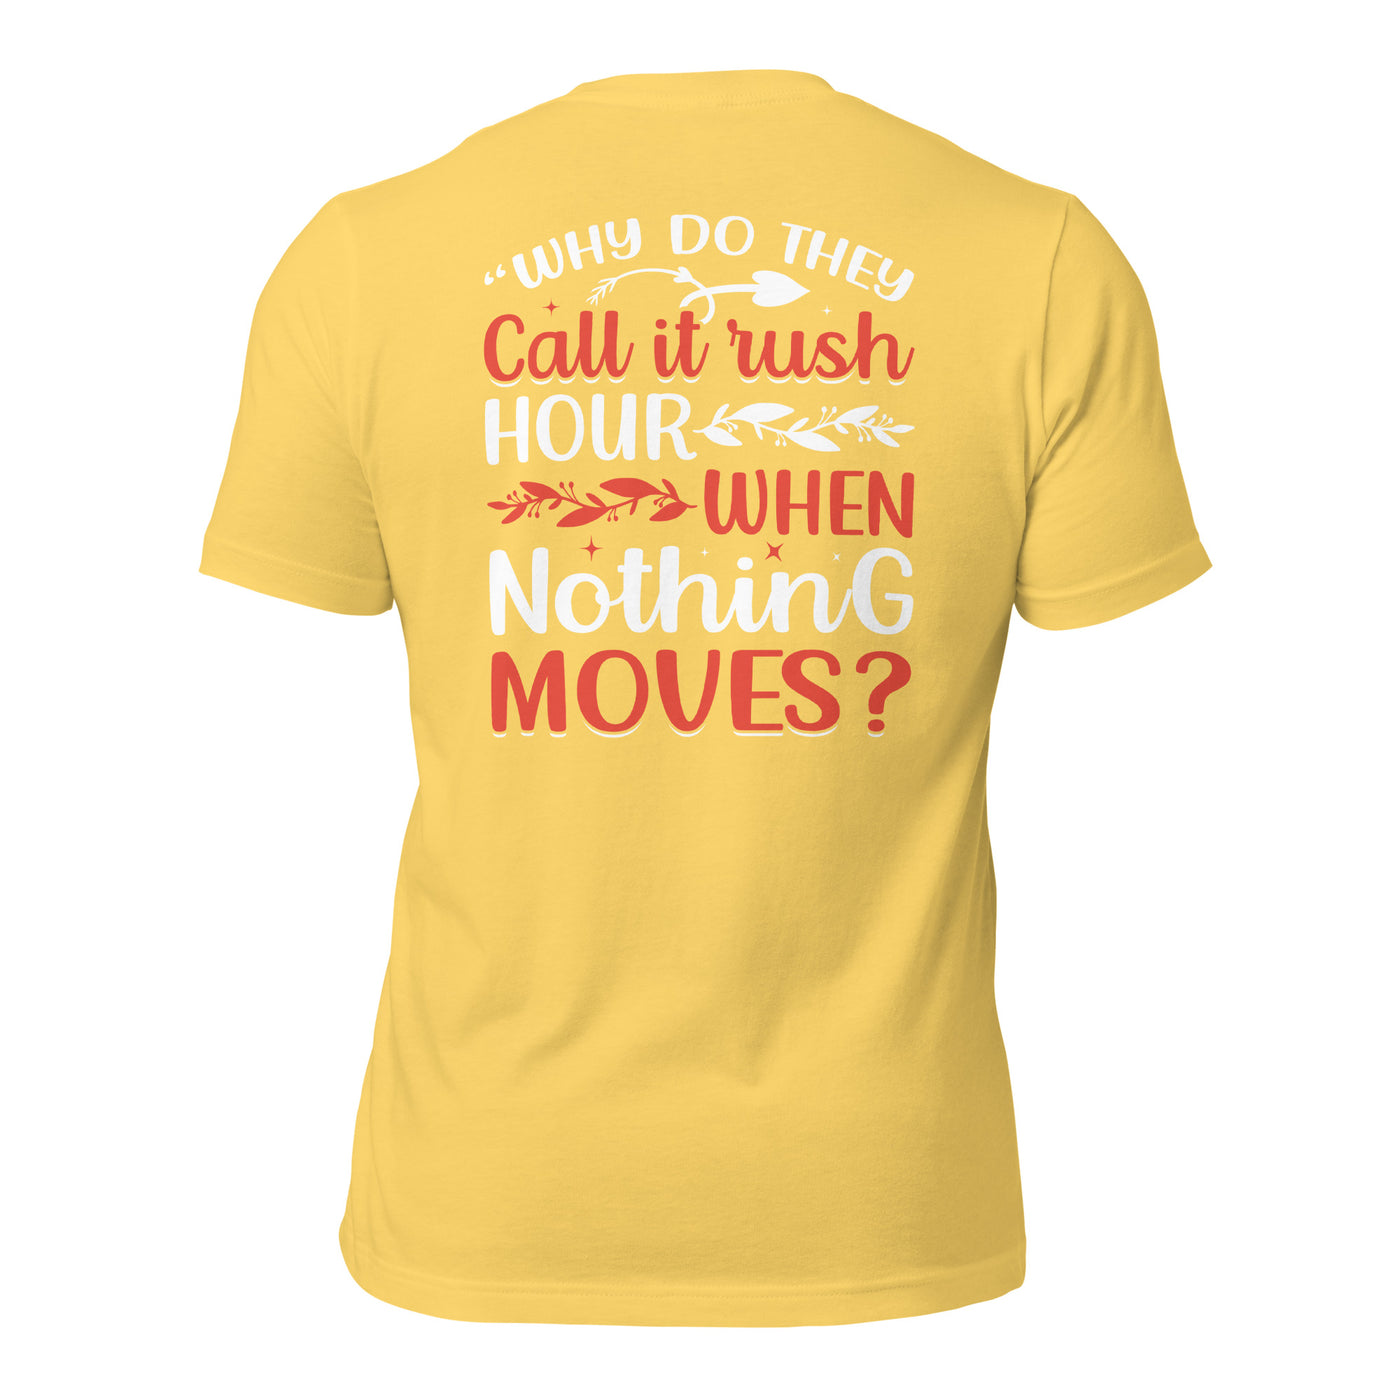 Why do they say Rush Hours, when nothing moves? - Unisex t-shirt ( Back Print )